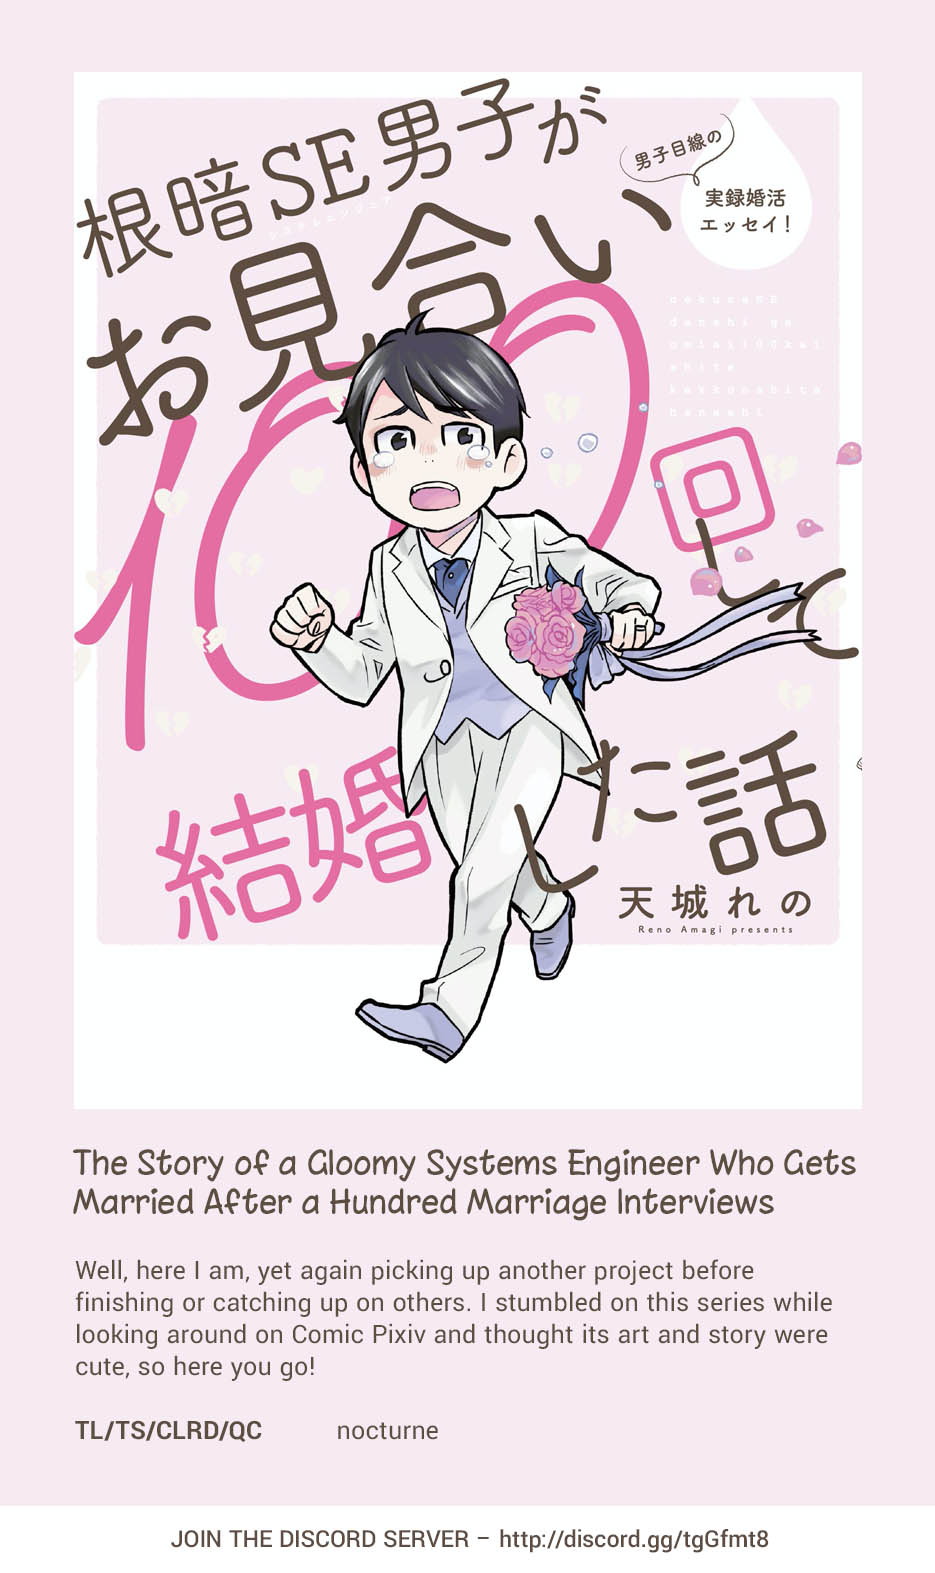 The Story of a Gloomy Systems Engineer Who Gets Married After a Hundred Marriage Interviews Ch. 1 My Girlfriend Dumped Me